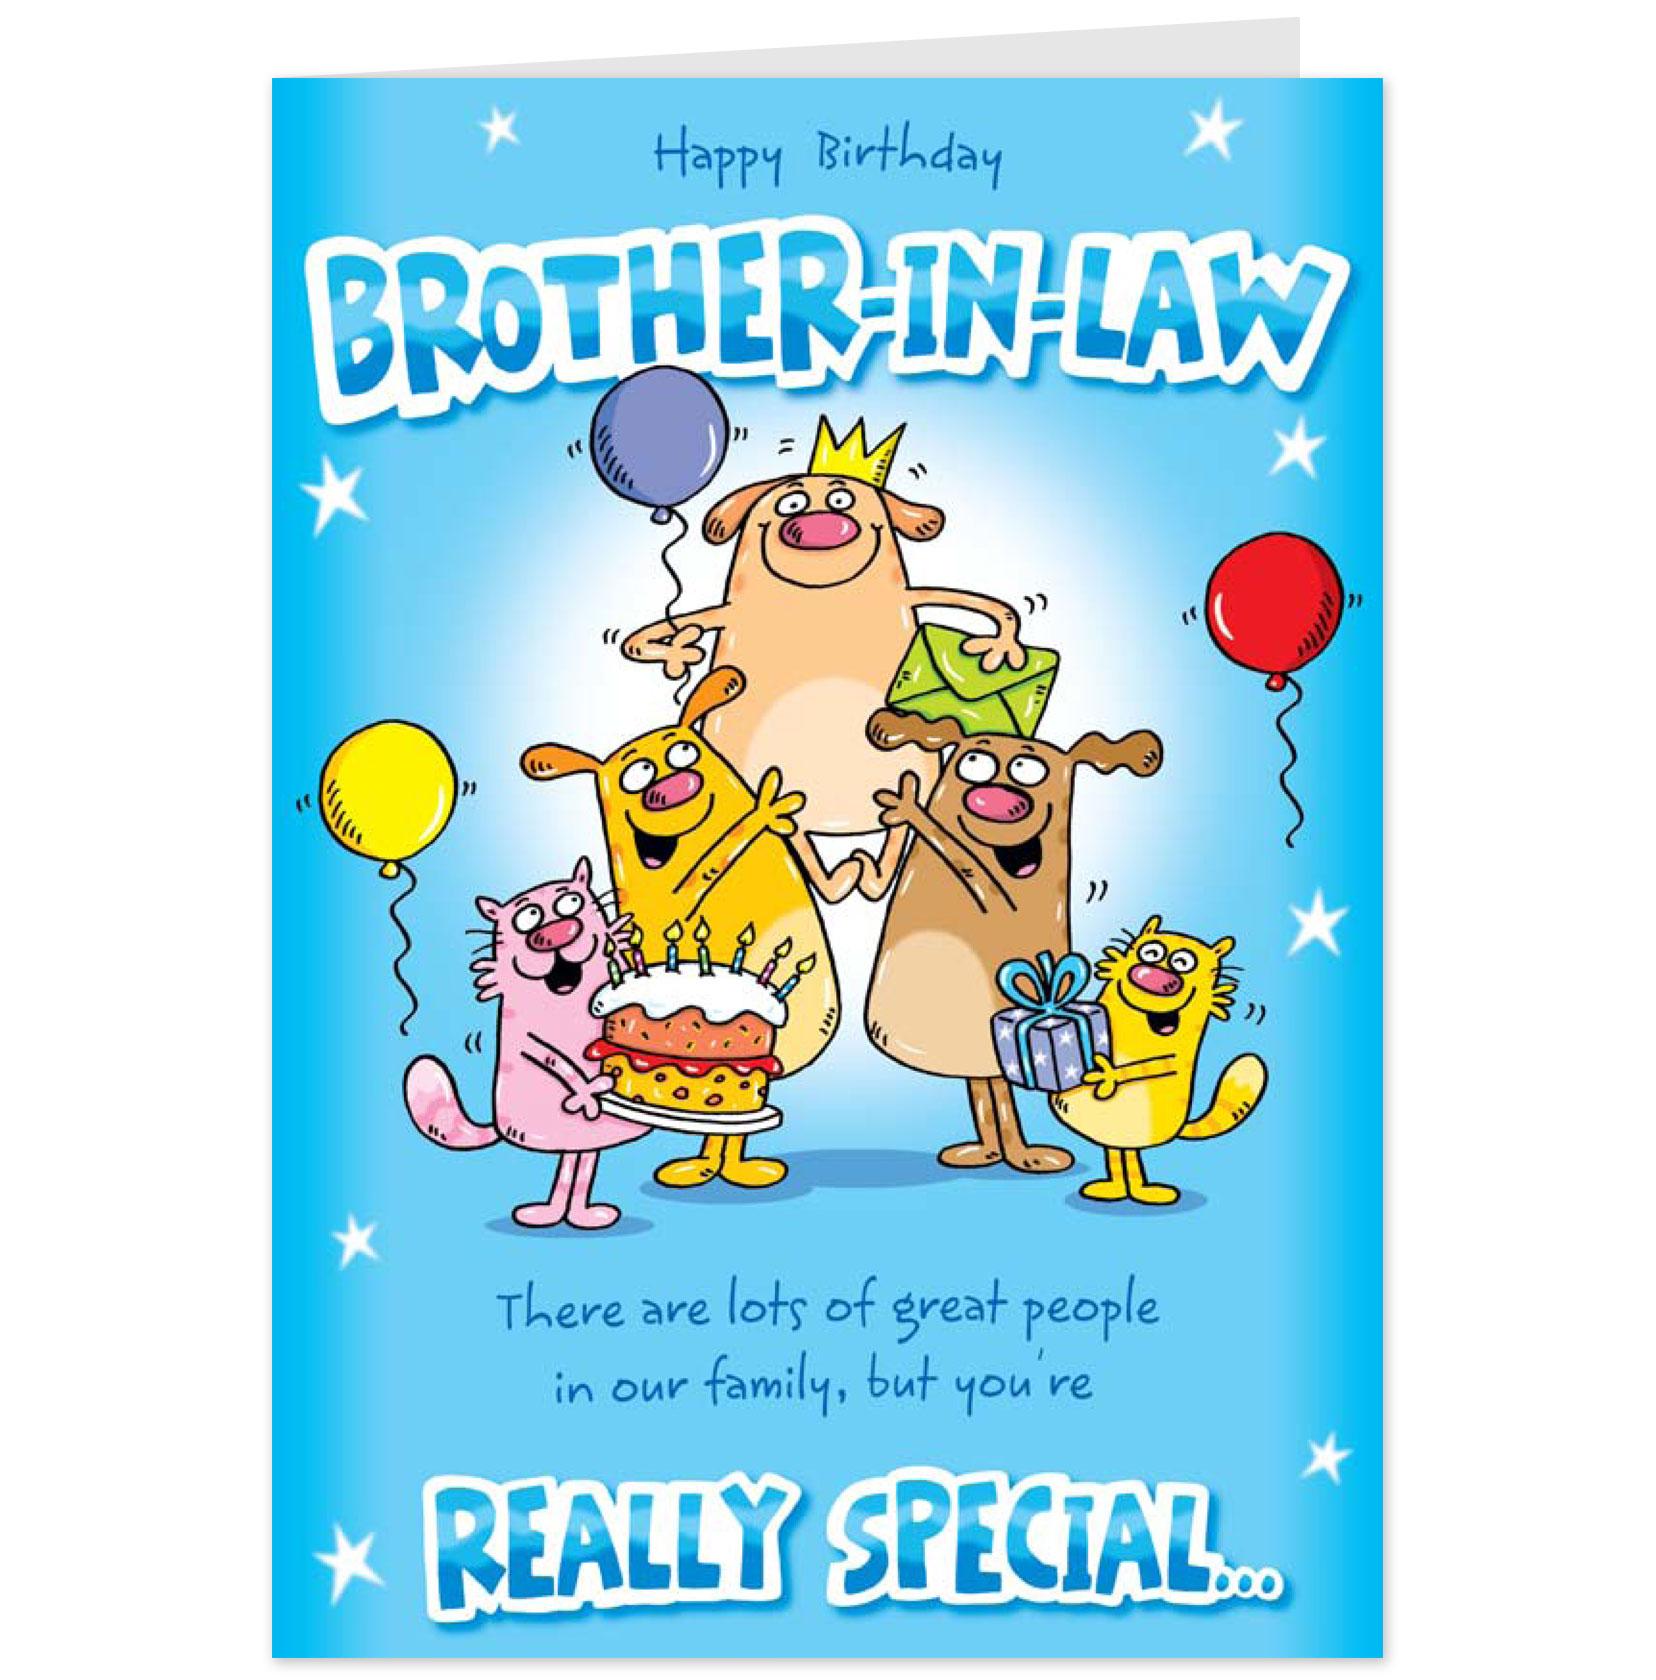 Happy Birthday Brother In Law Quotes Funny. QuotesGram